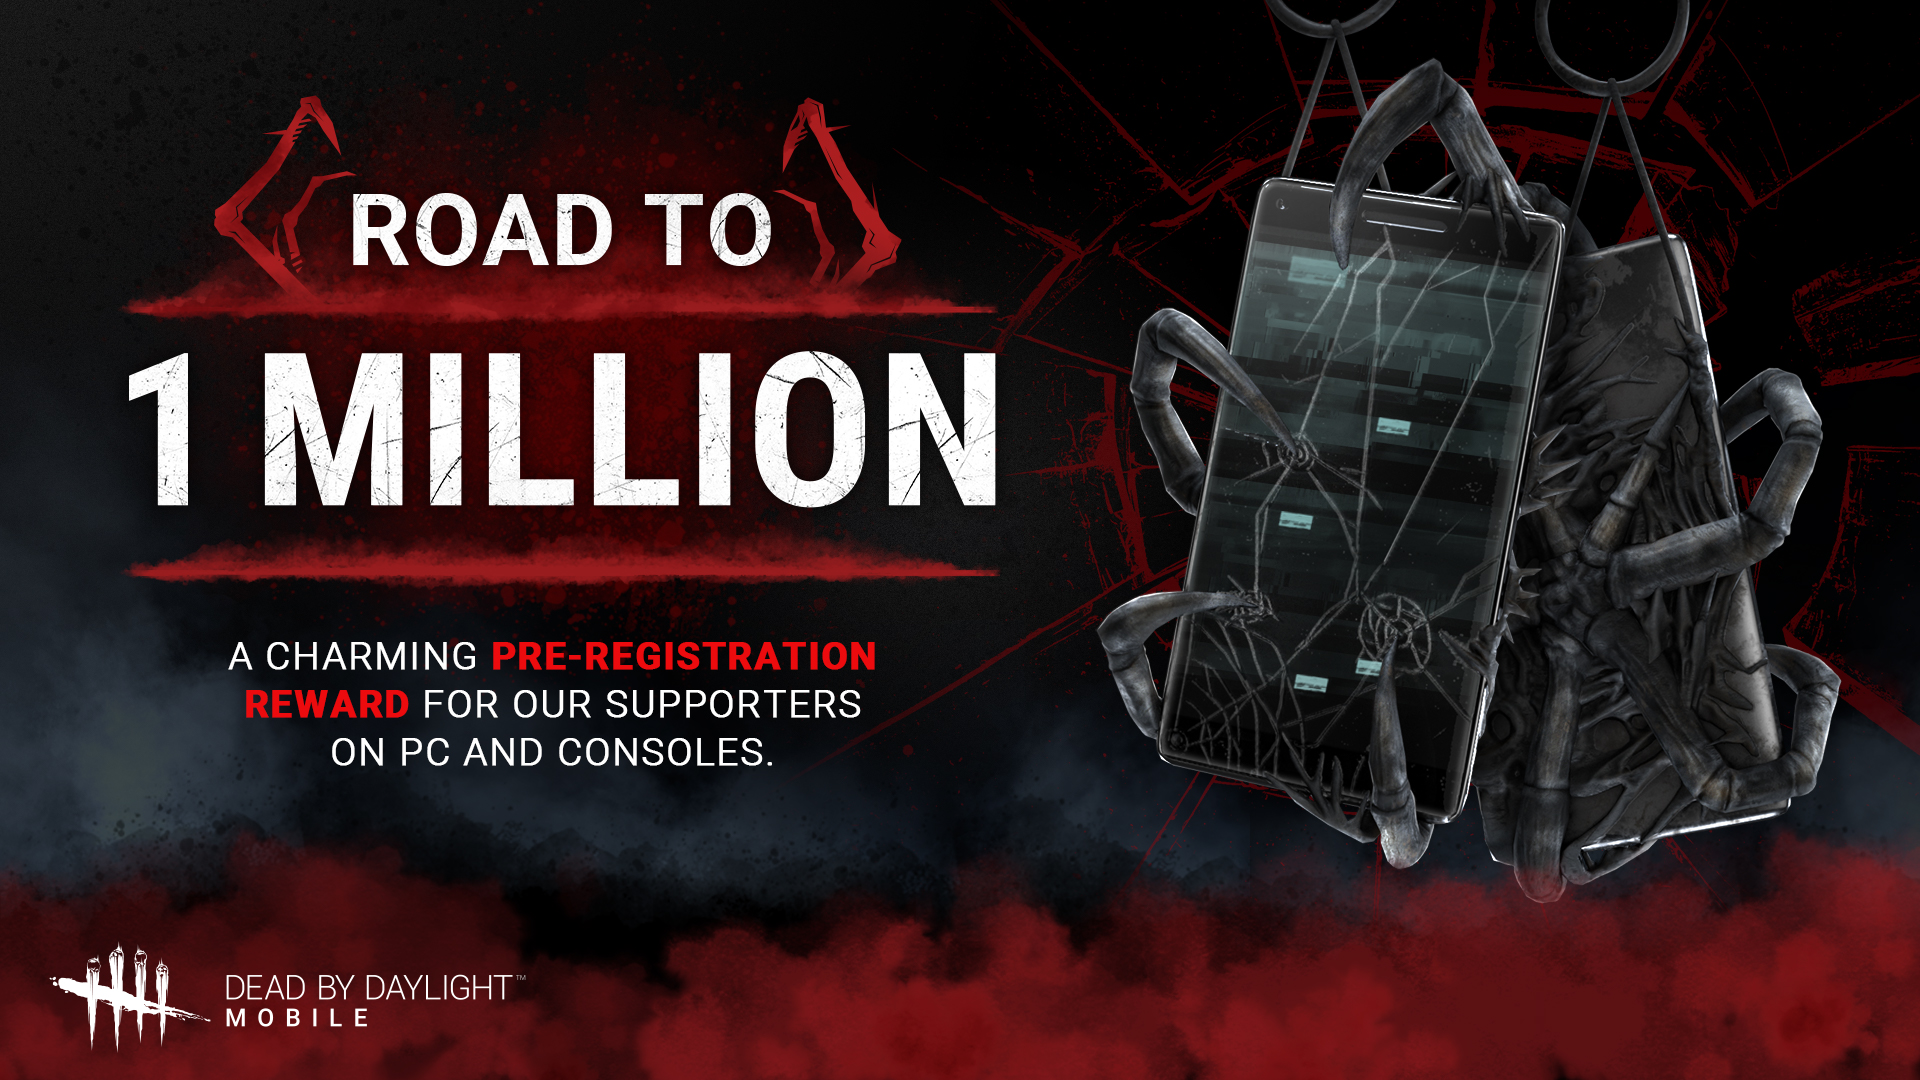 Dead By Daylight No Signal Help Dbdmobile Reach 1 000 000 Pre Registrations By April 16th And Receive The Unlimited Entity Wide Charm On Pc And Console Sign Up Here T Co Qhto4fmssd Deadbydaylight Dbd T Co Ieijlxfpvo